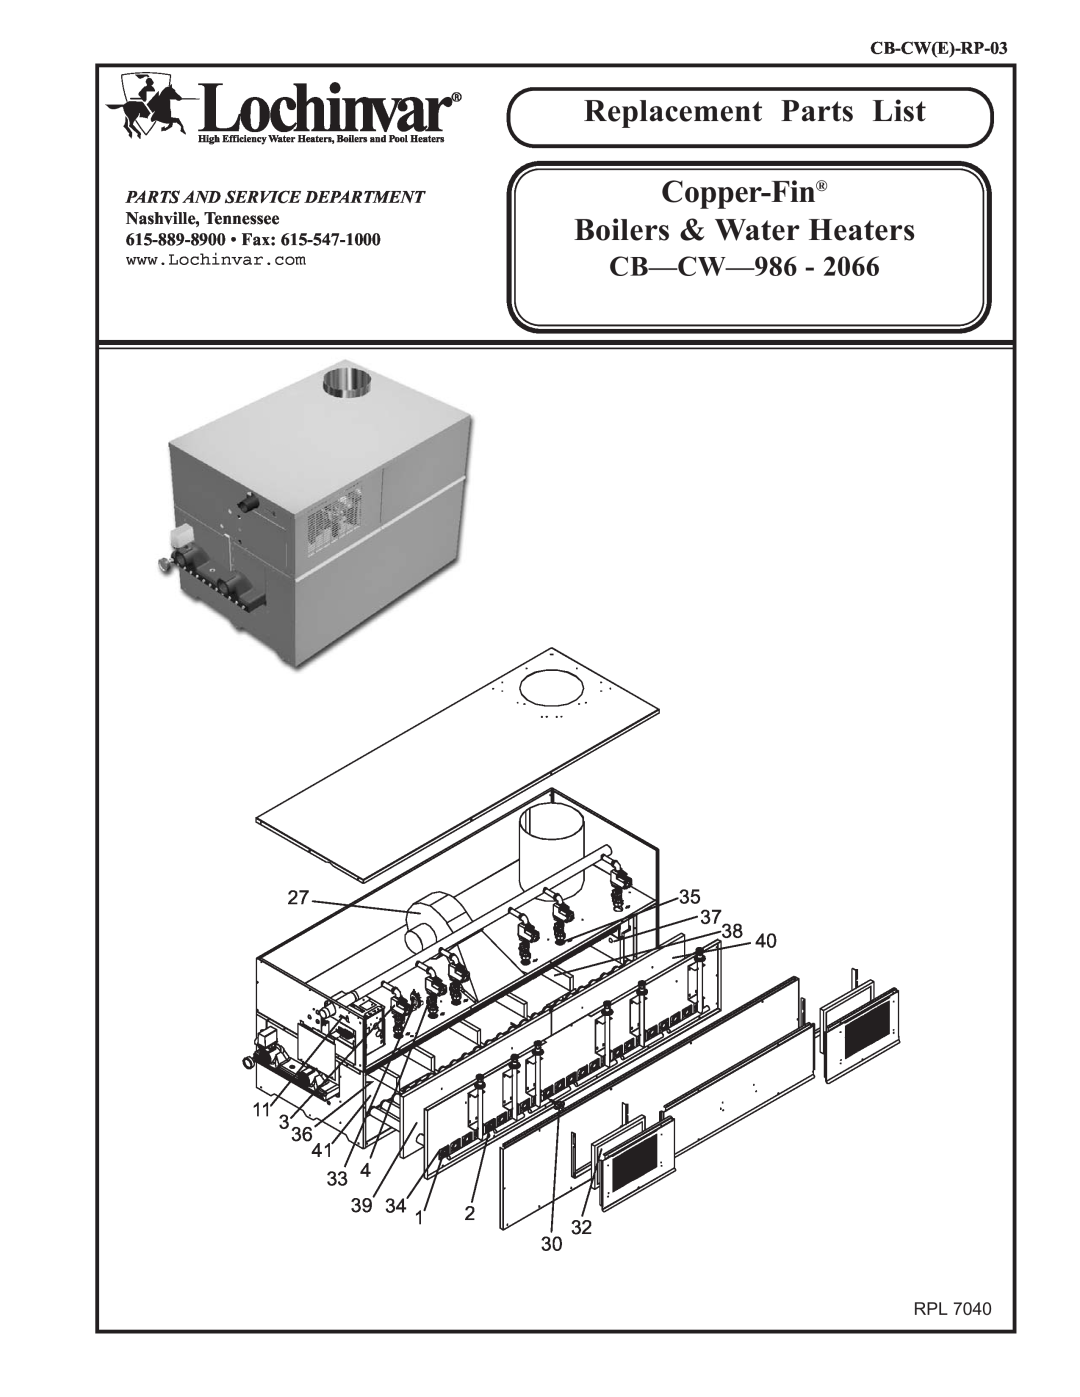 Lochinvar CB986-2066 manual Replacement, Parts, List, Boilers & Water Heaters, Copper-Fin, CB-CW-986 